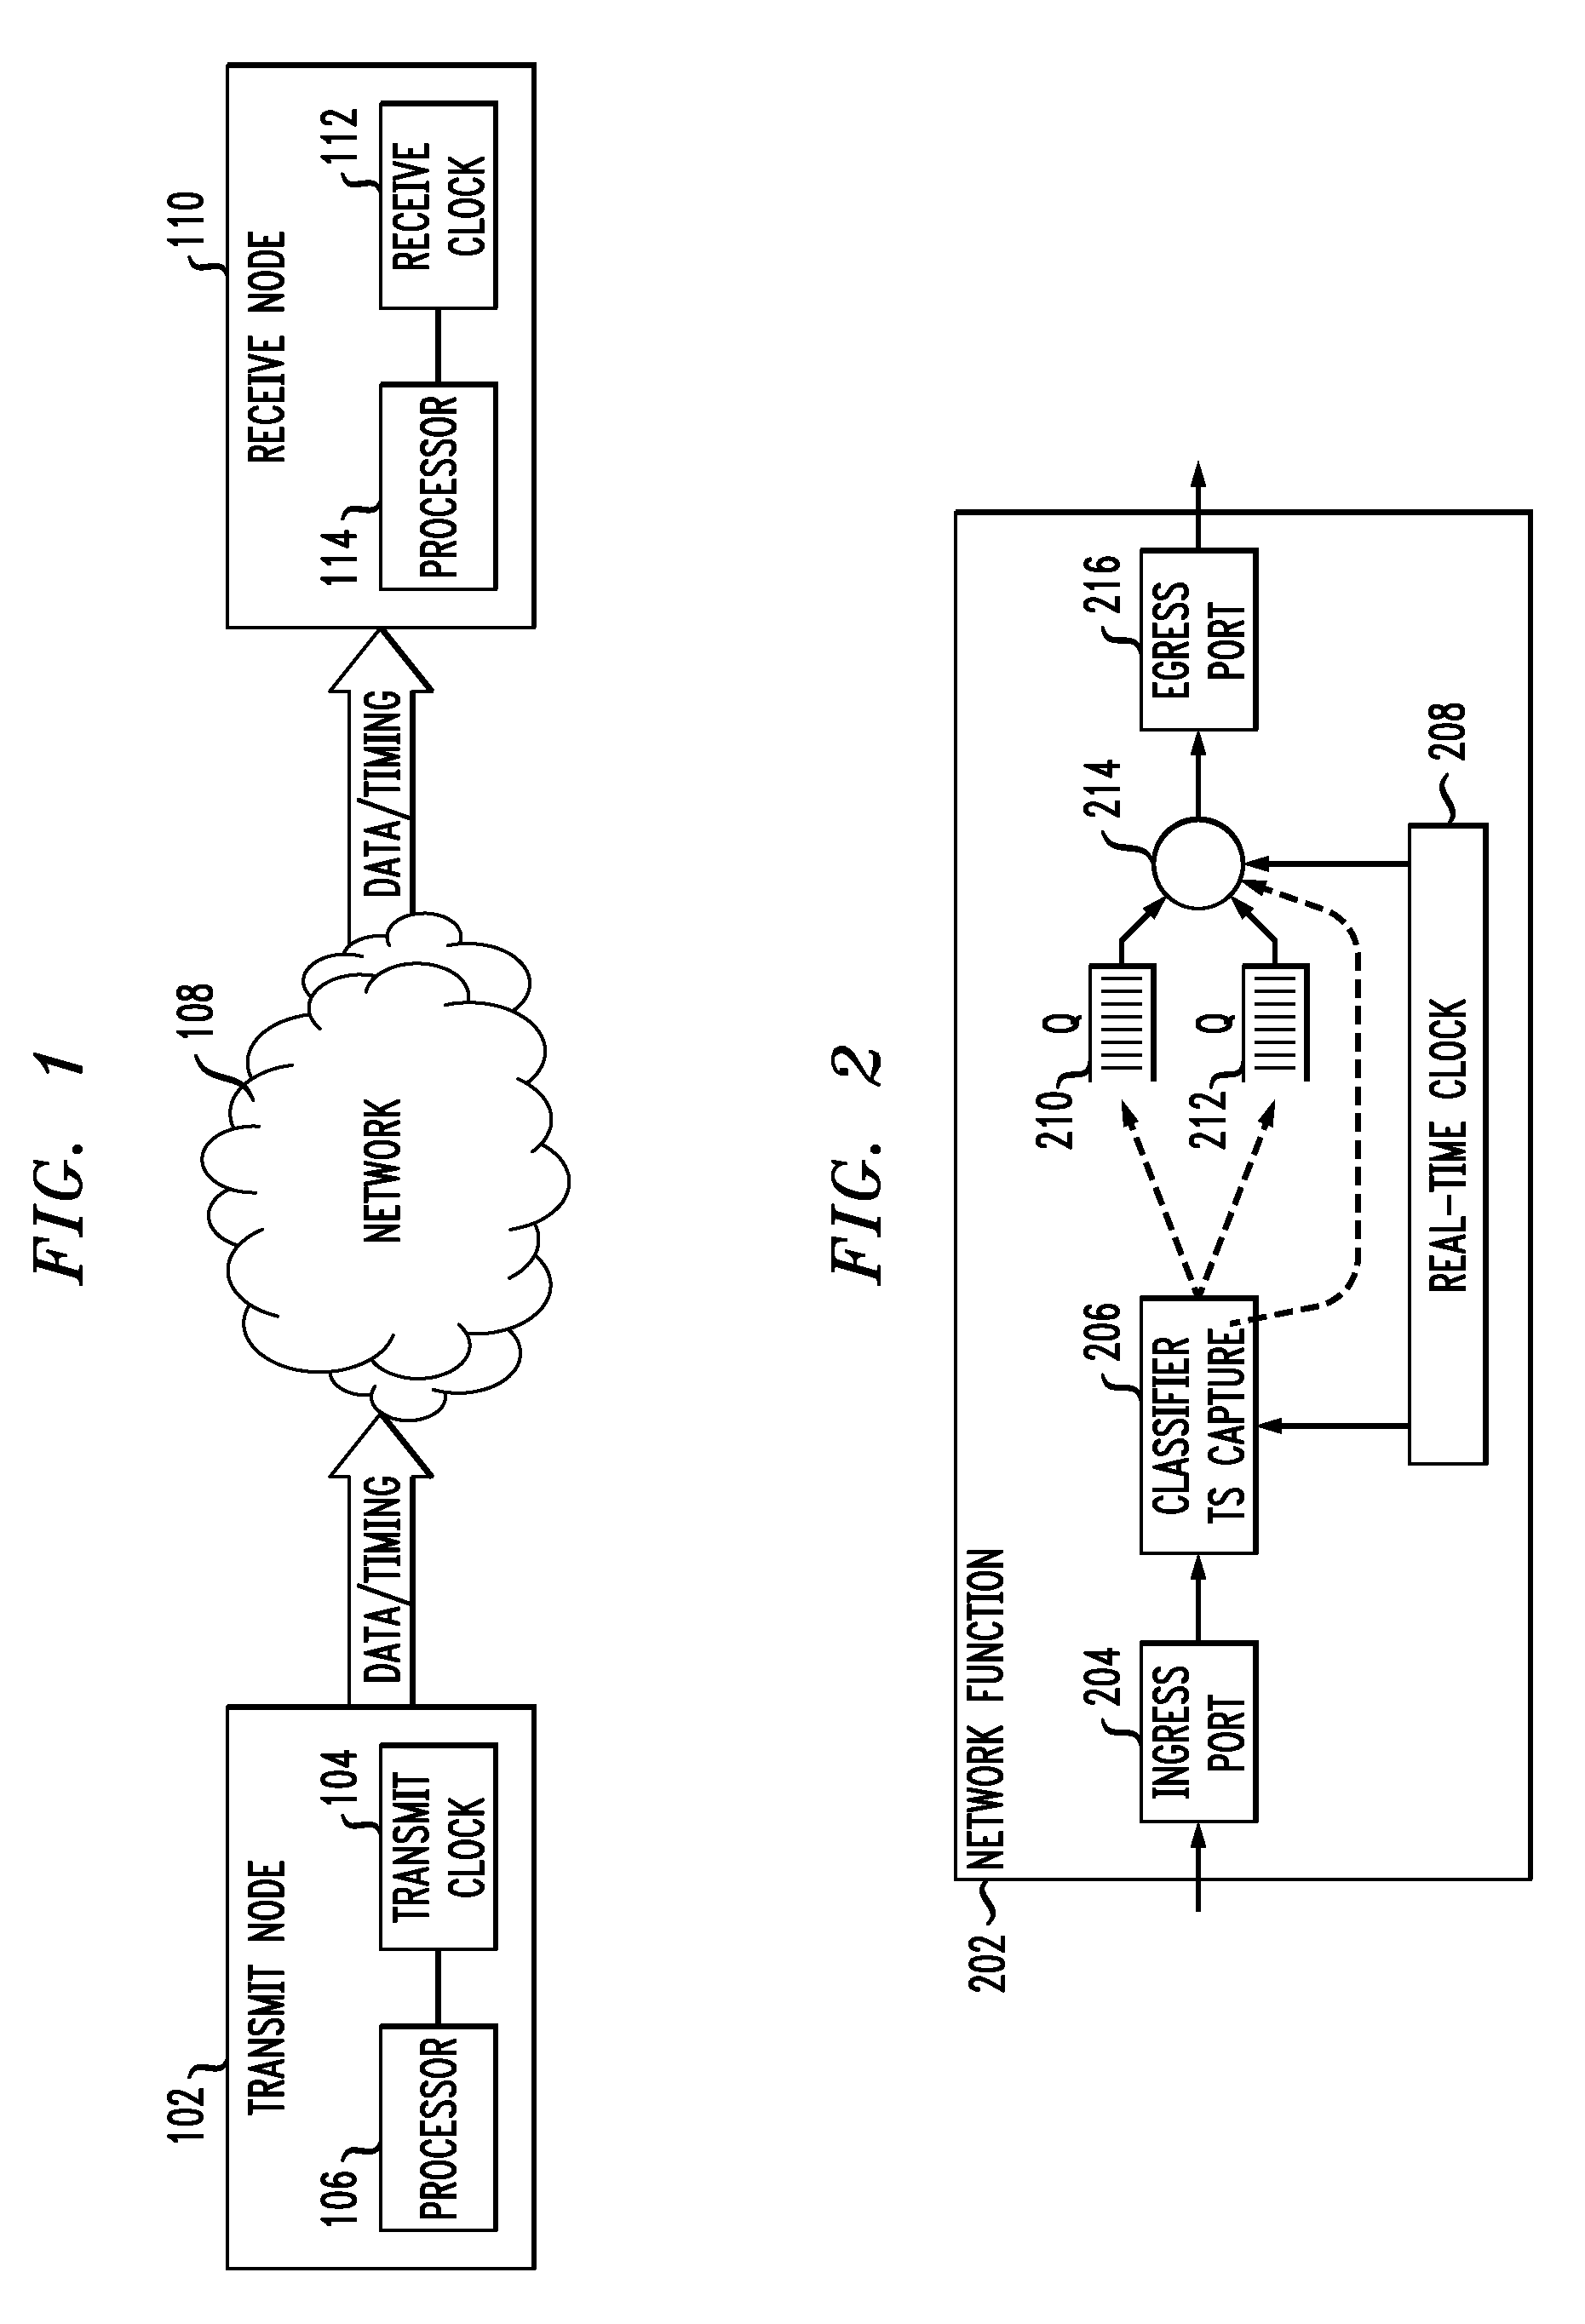 Methods and Apparatus for Controlling Latency Variation in a Packet Transfer Network